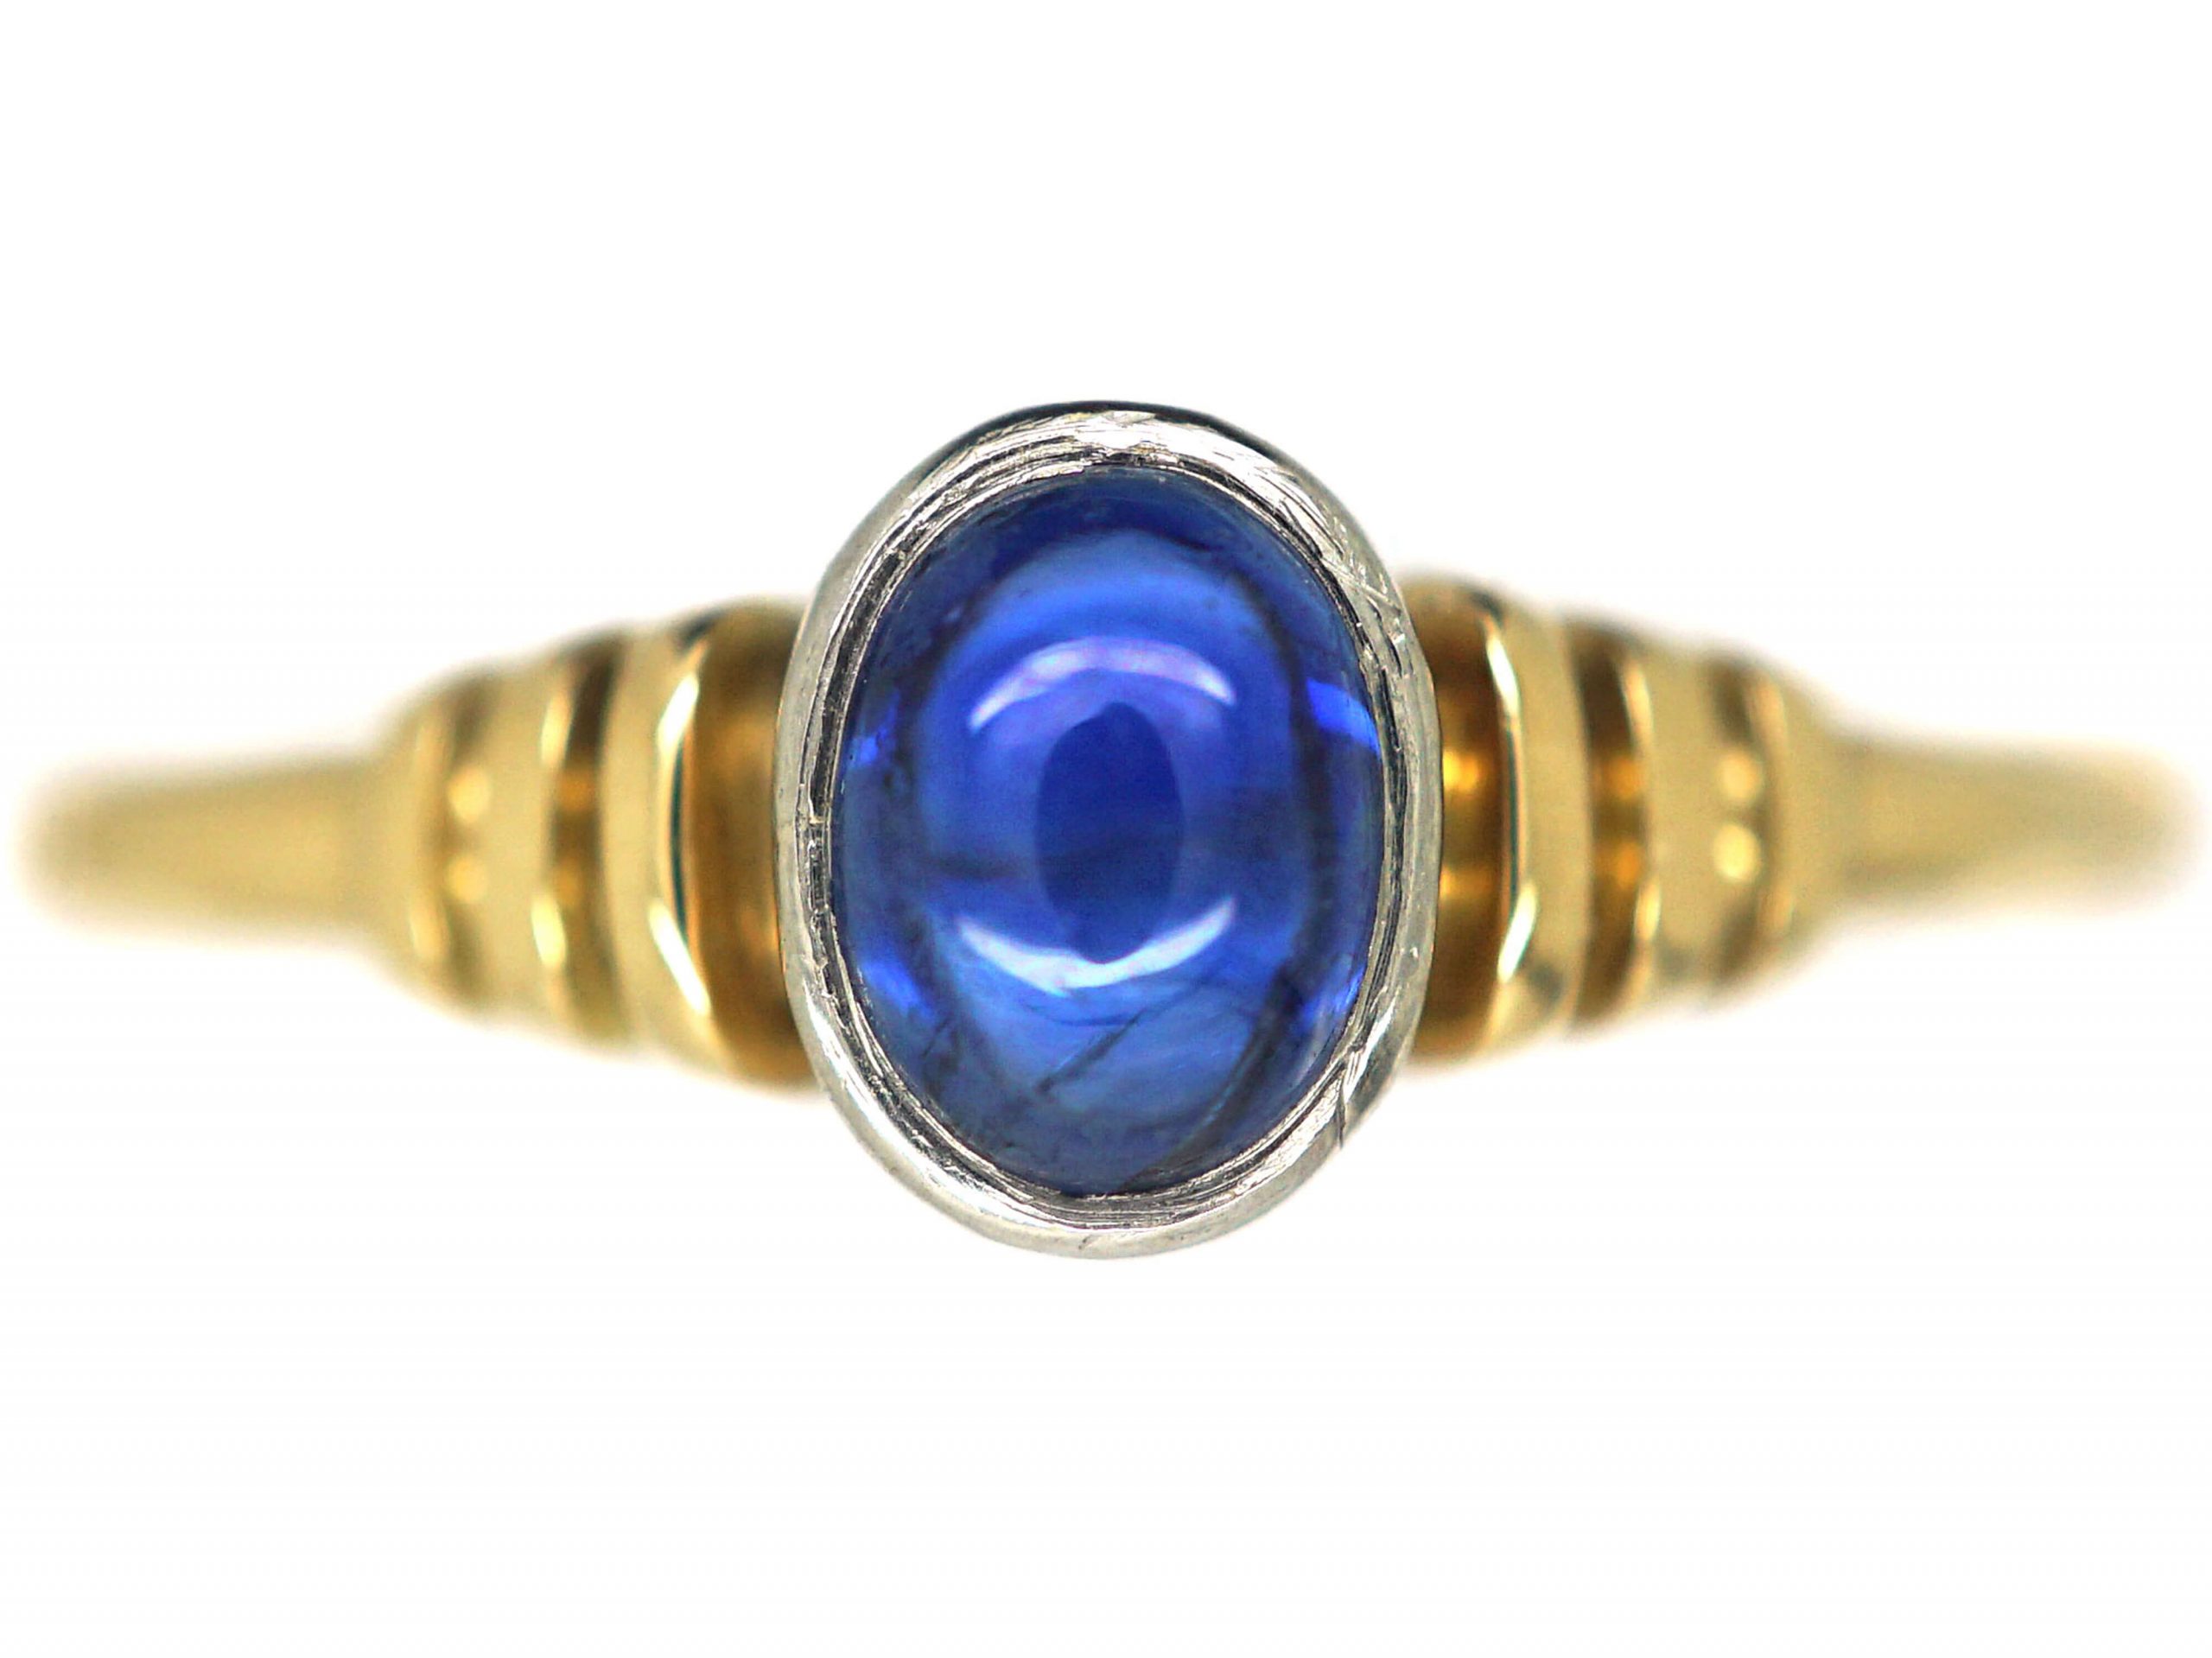 Gold sapphire ring A 9K yellow gold 8 blue sapphire cabachon ring.